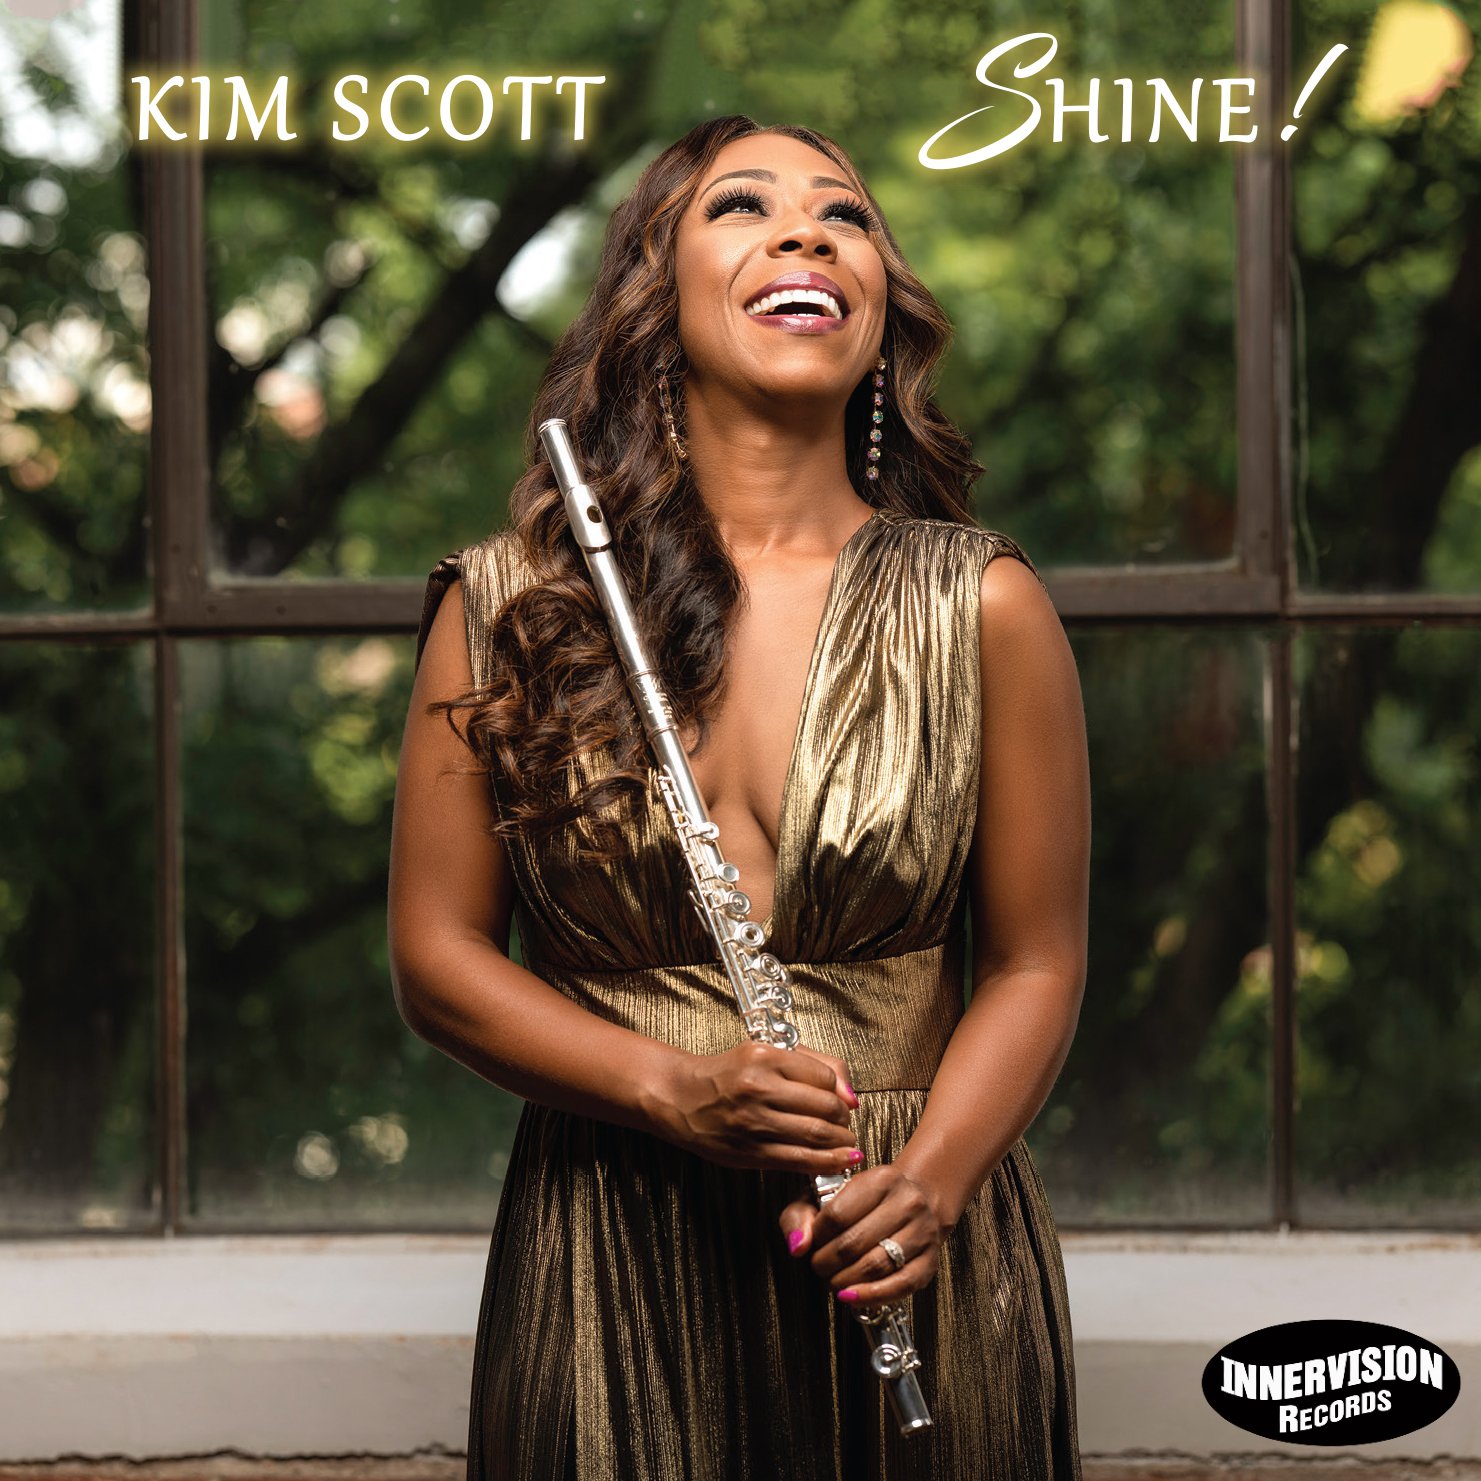 SHINE! front cover.jpg